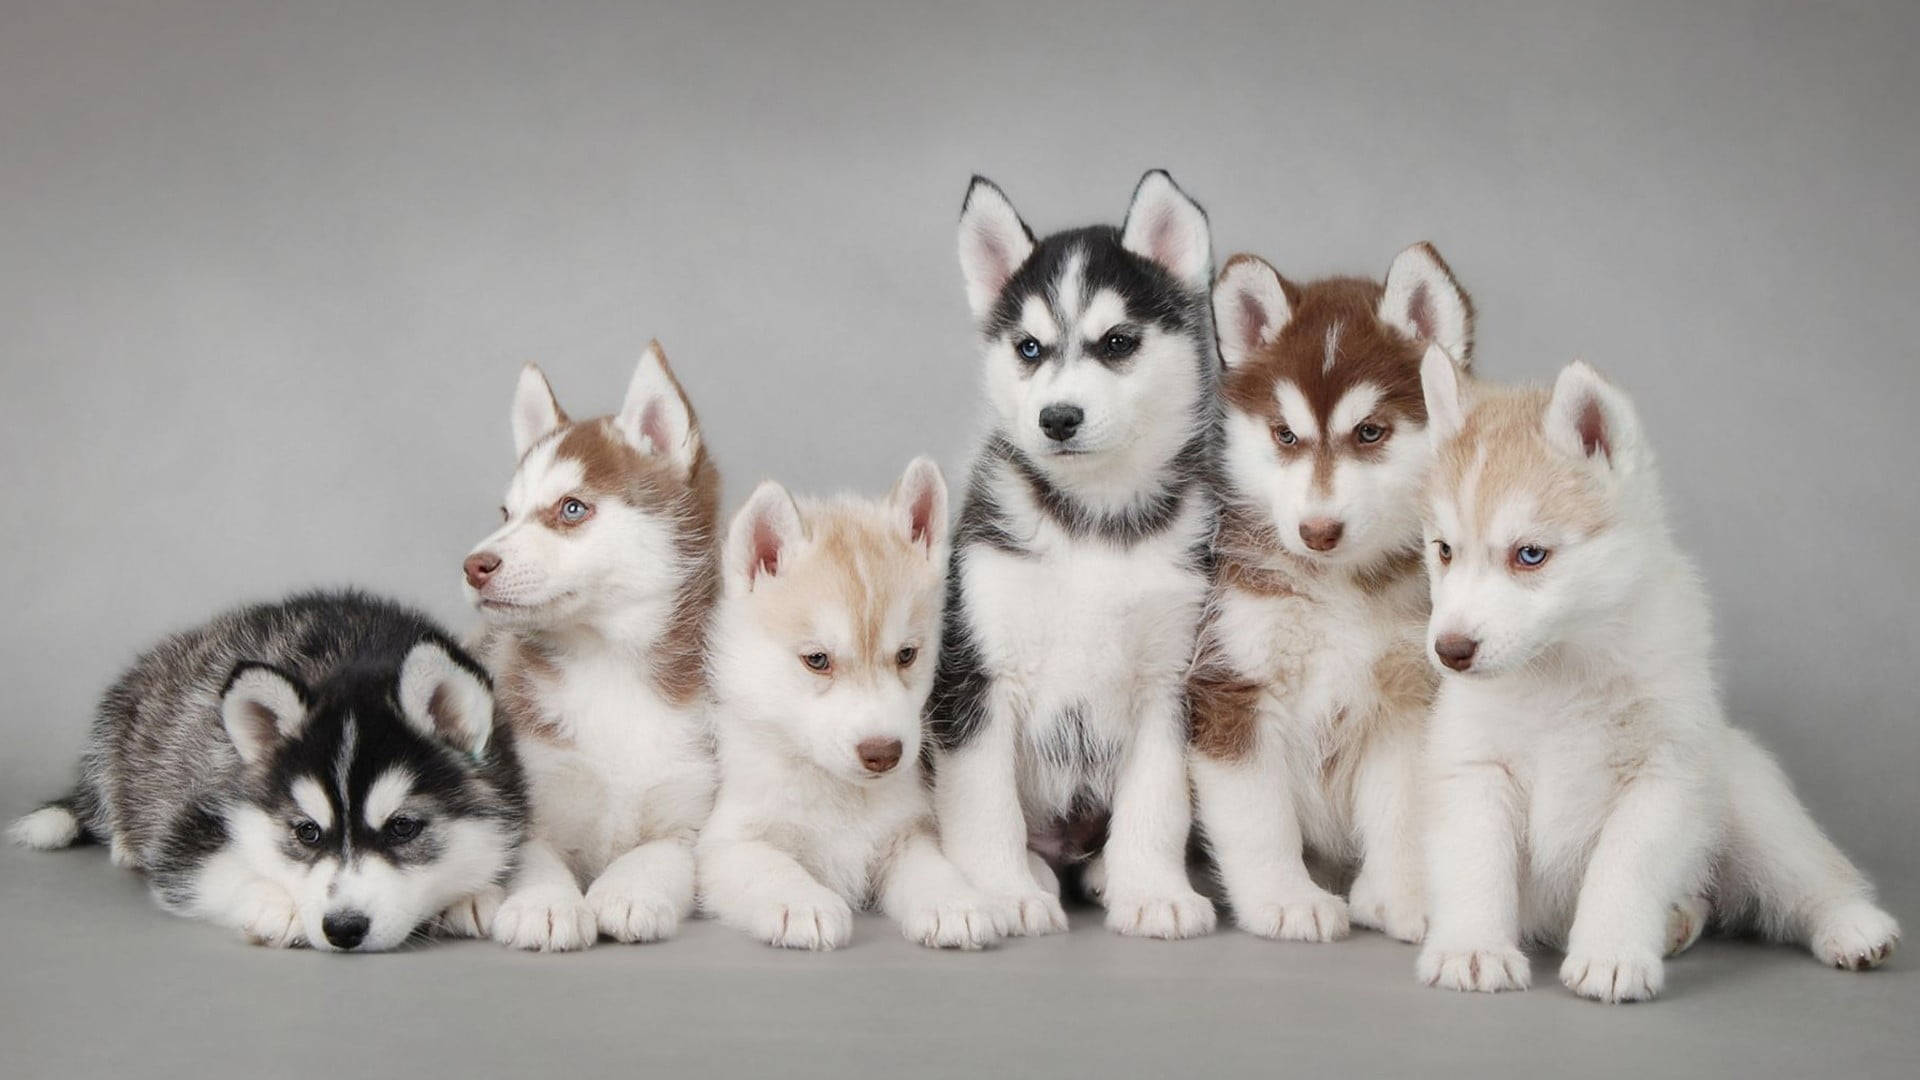 Free Husky Puppy Wallpaper Downloads, [100+] Husky Puppy Wallpapers for  FREE 